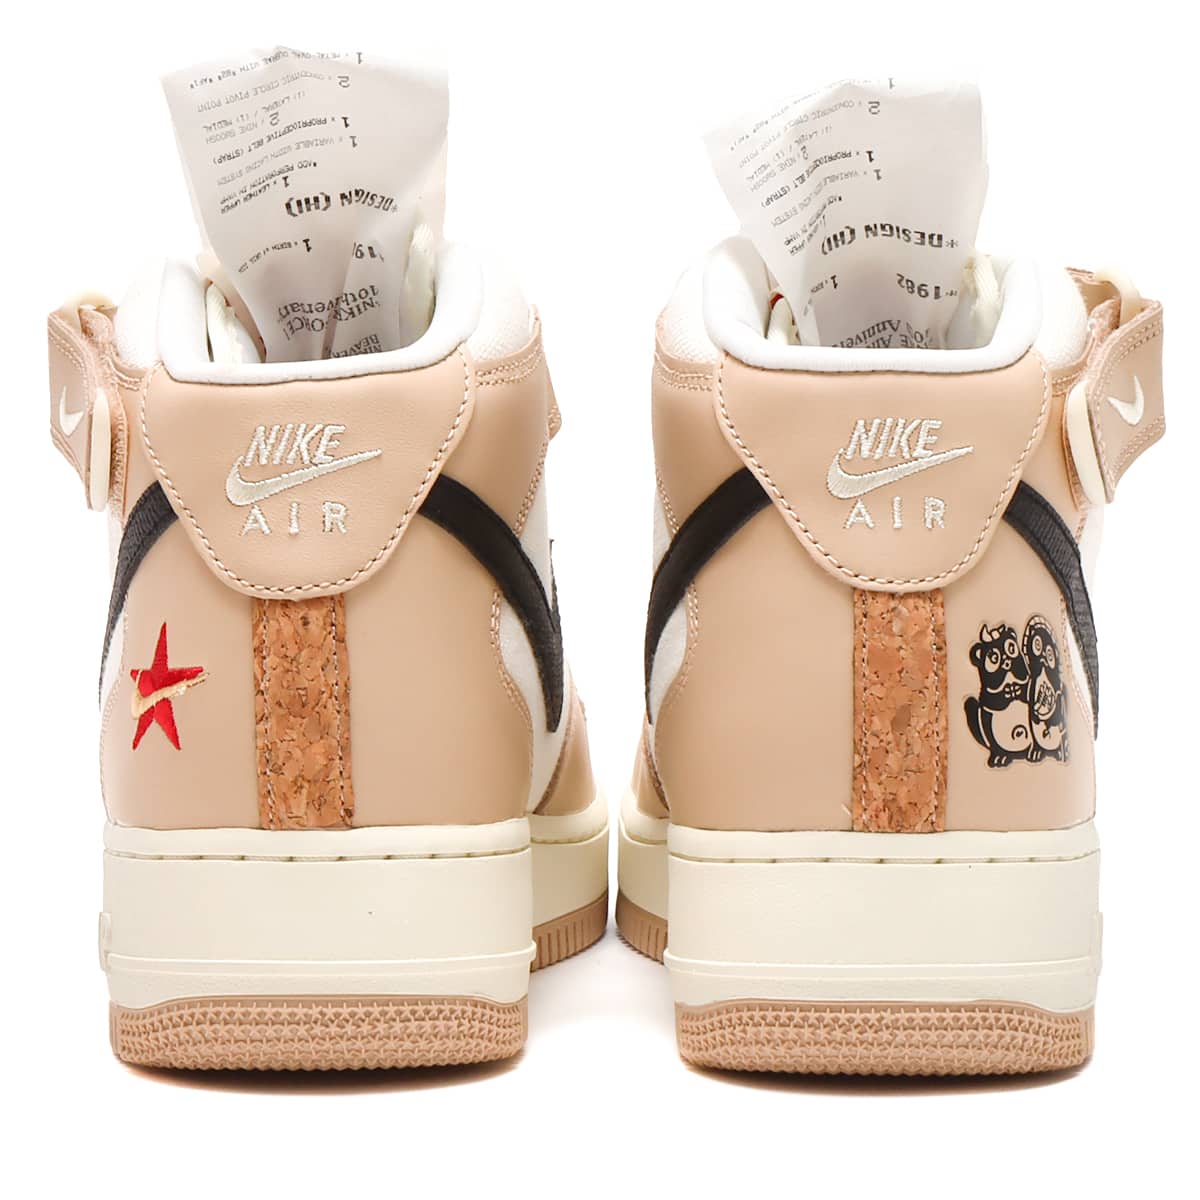 NIKE AIR FORCE 1 MID '07 LX SHIMMER/BLACK-PALE IVORY-COCONUT MILK 